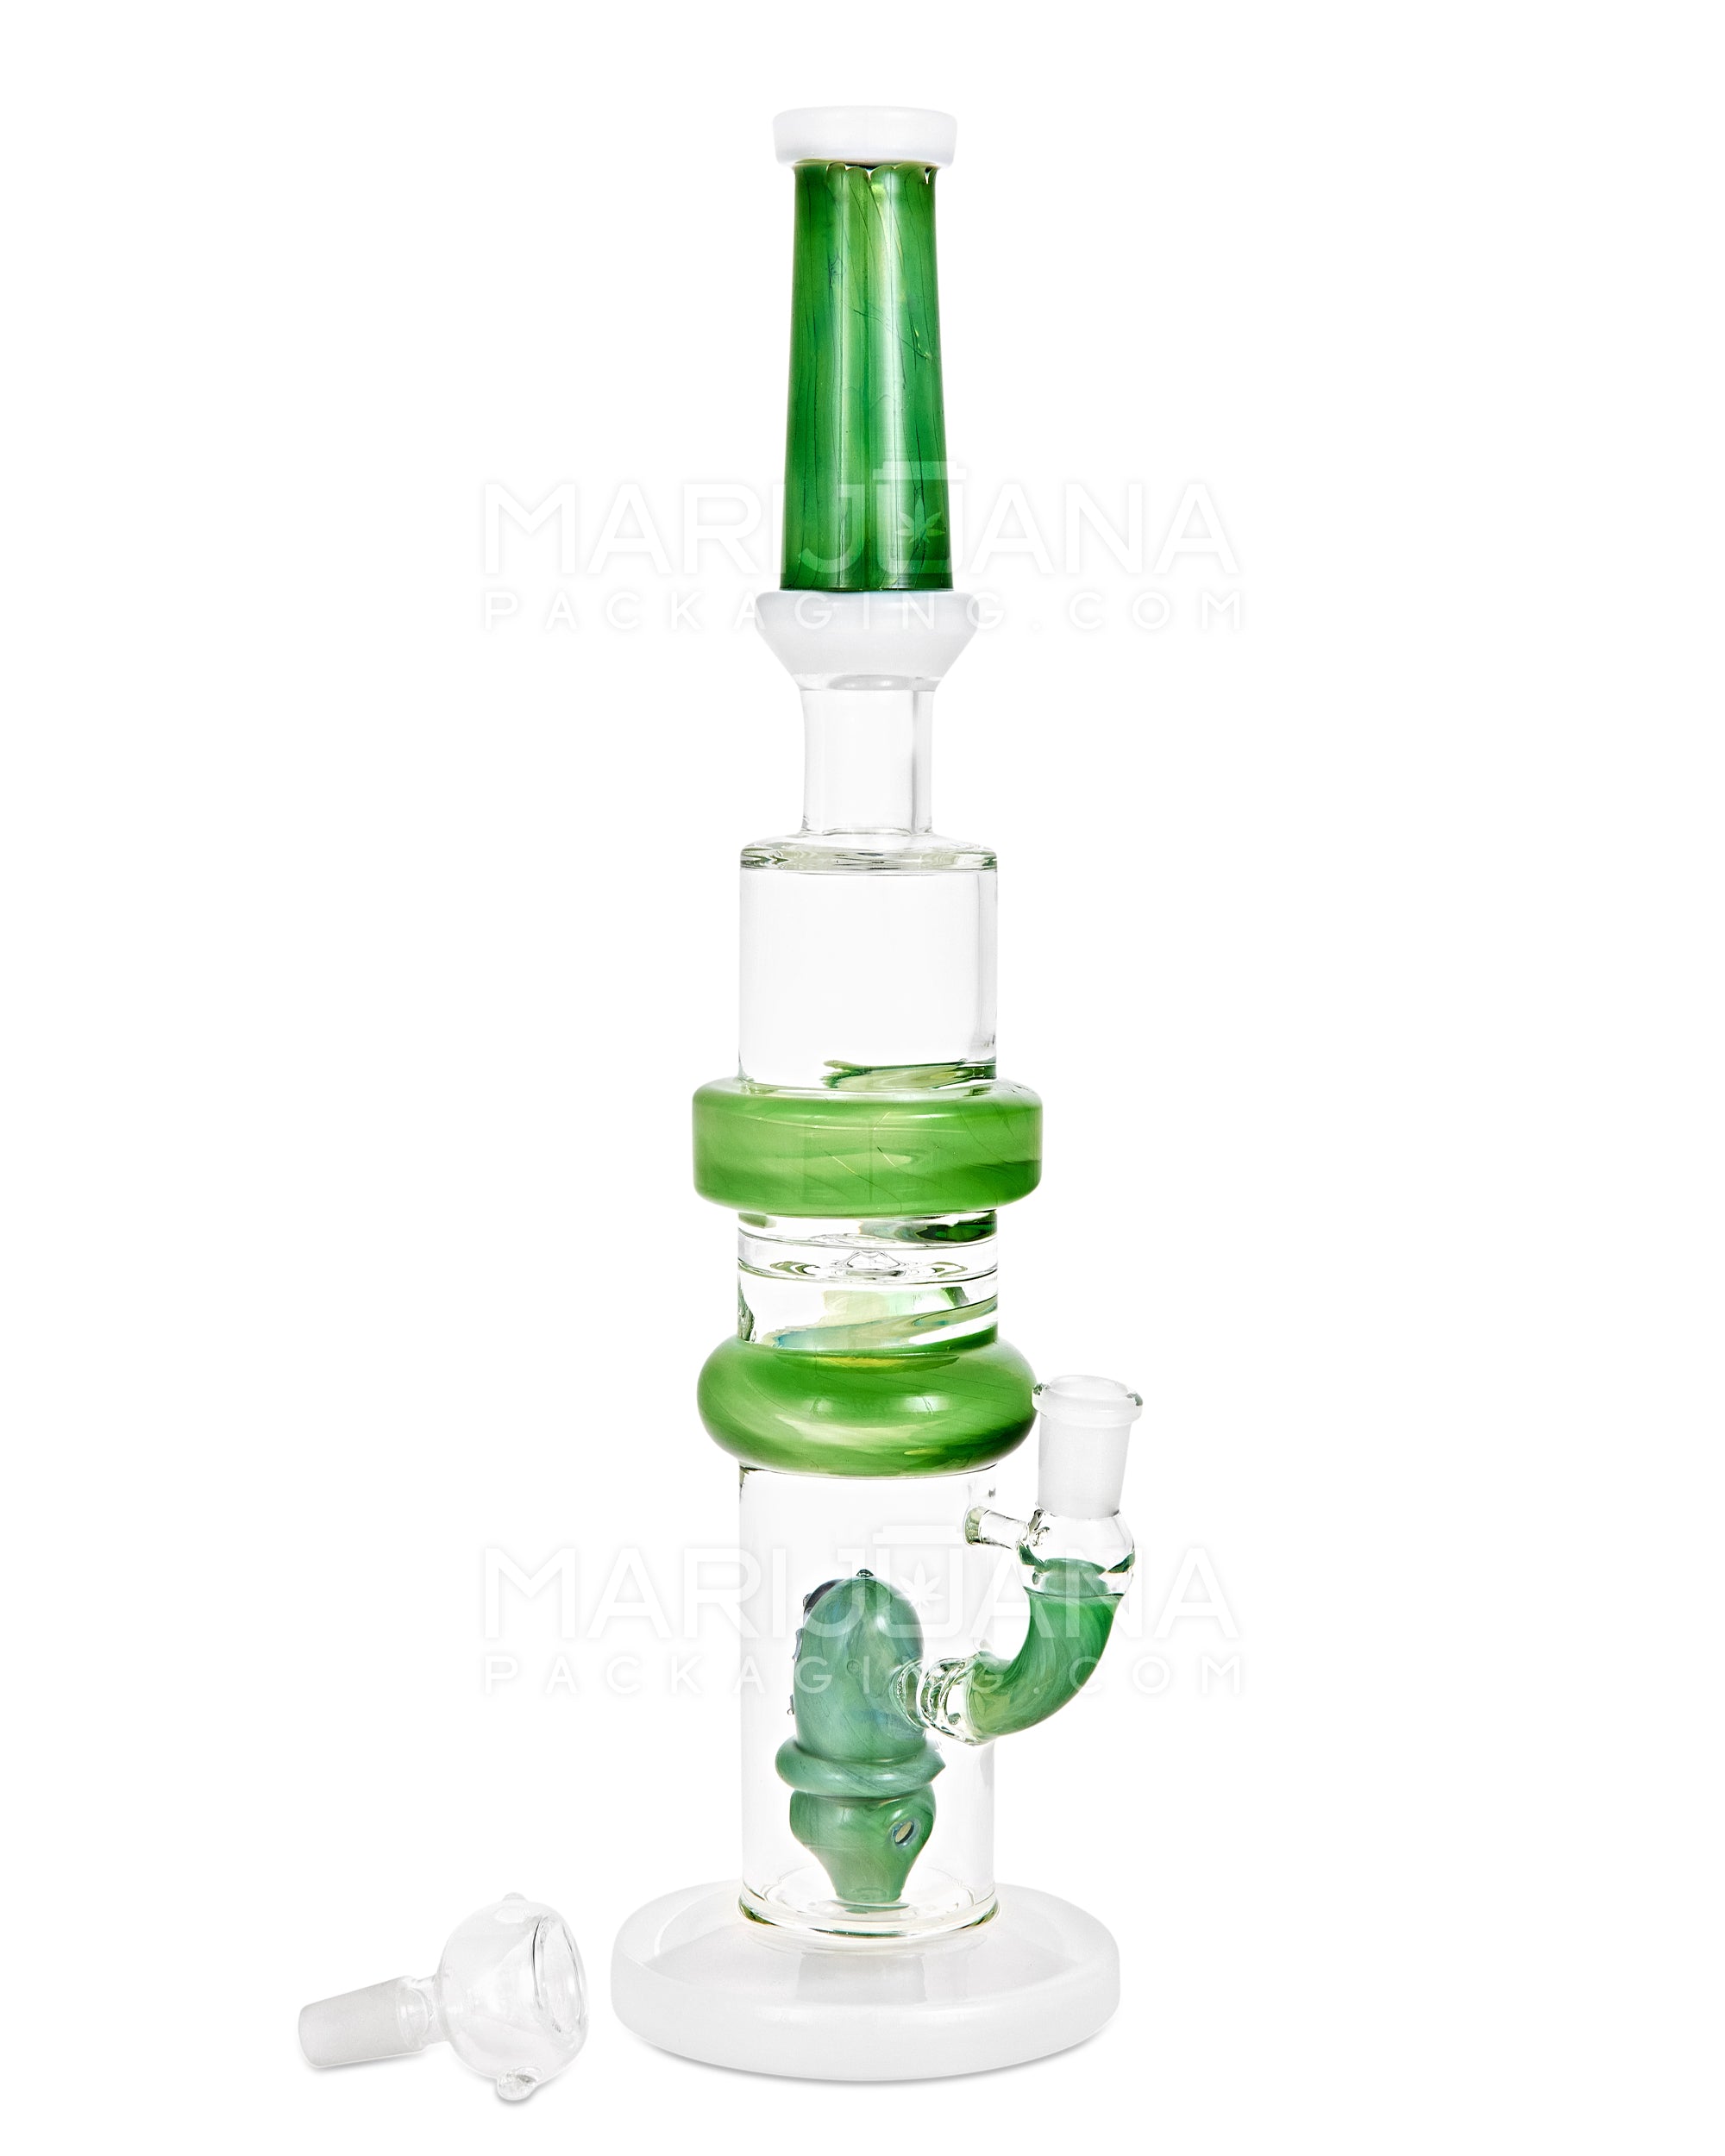 Straight Neck Frog Barrel Perc Glass Water Pipe w/ Ice Catcher | 14.5in Tall - 14mm Bowl - Green - 2